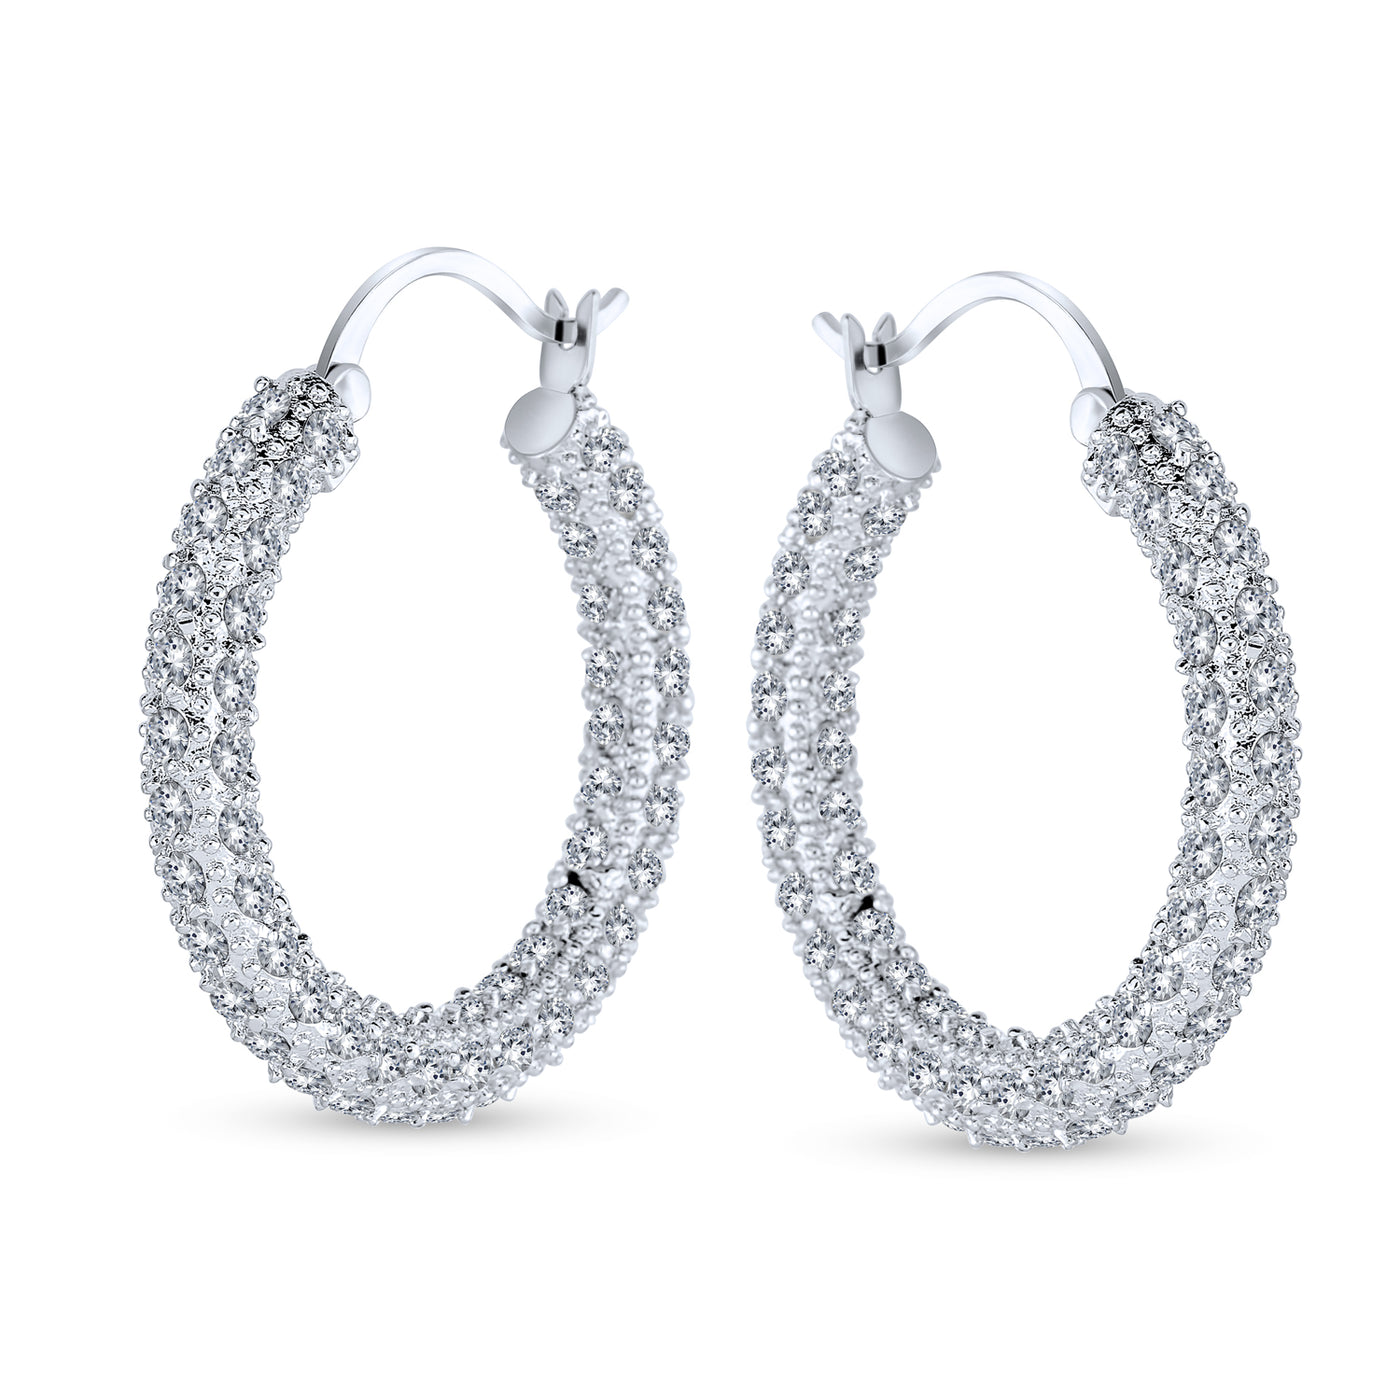 Bridal Pave CZ Encrusted Prom Statement Hoop Earring Silver Plated